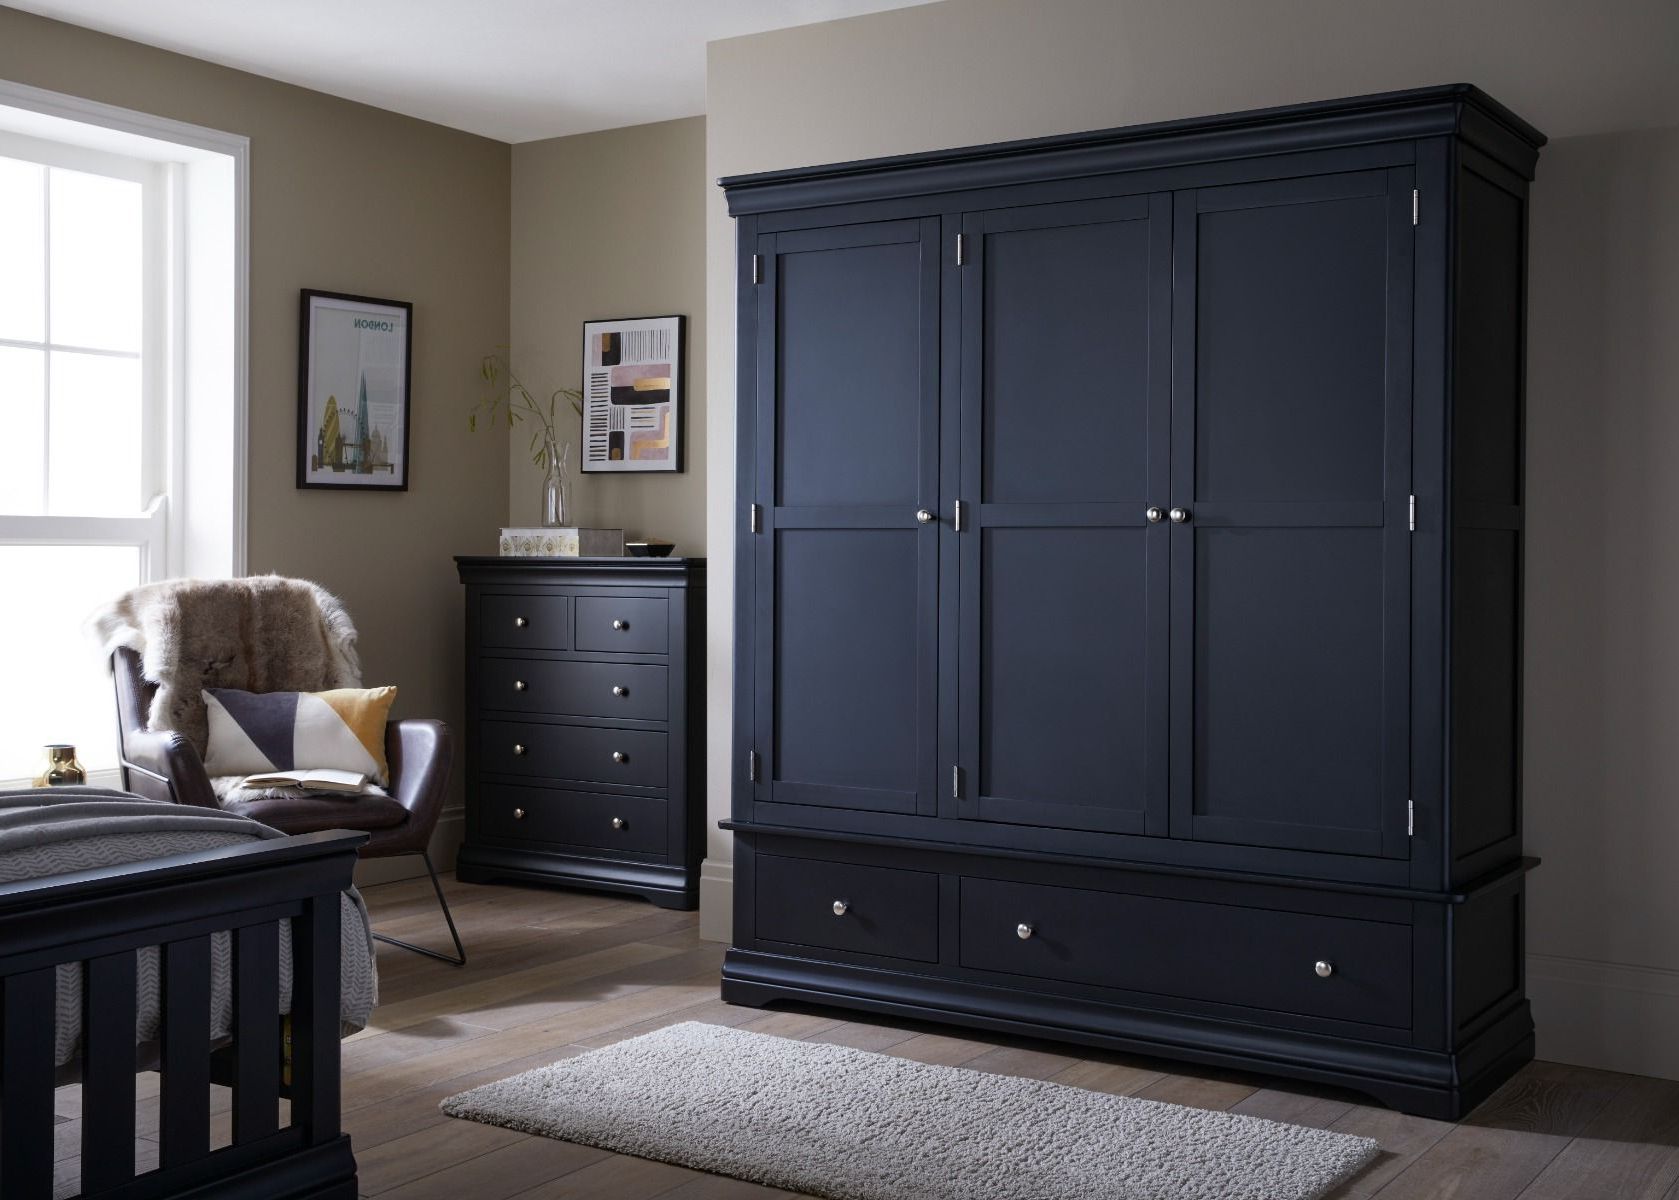 Toulouse Black Painted Large Triple Wardrobe With Drawer Pertaining To Dark Wood Wardrobes With Drawers (Gallery 1 of 20)